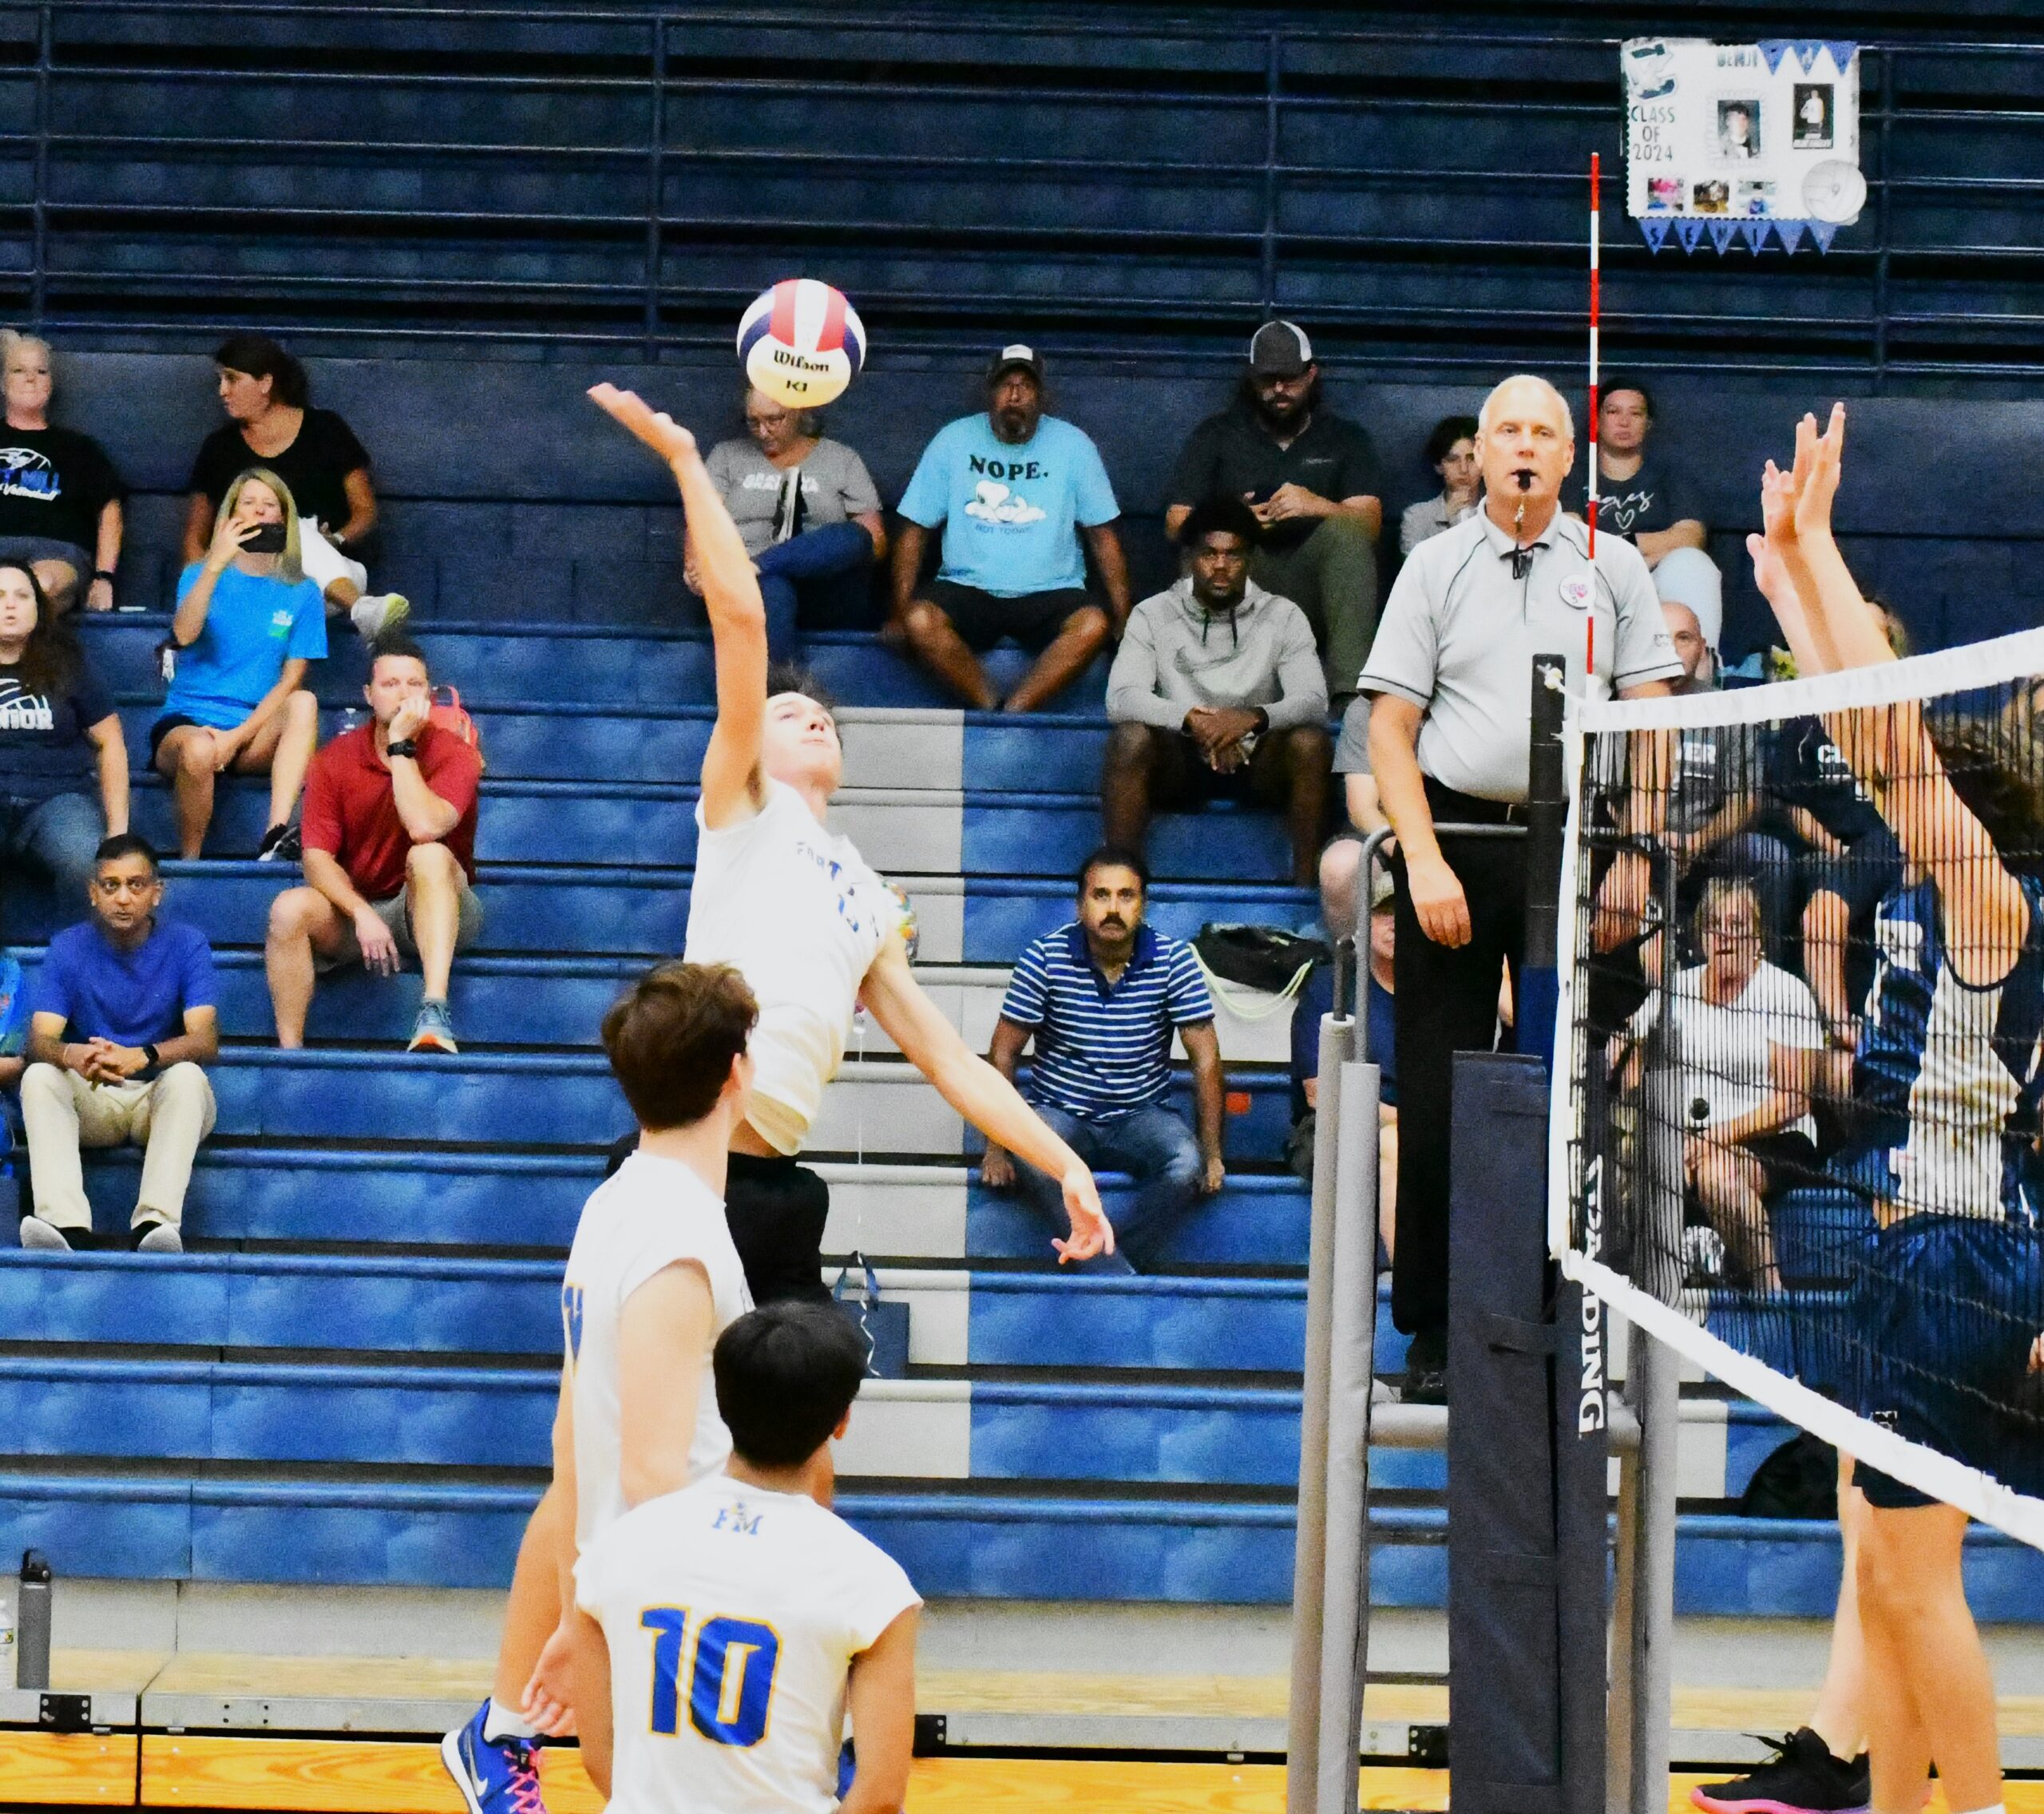 Fort Mill boys fall to Clover to earn share of Region volleyball title (Oct. 4 Roundup)